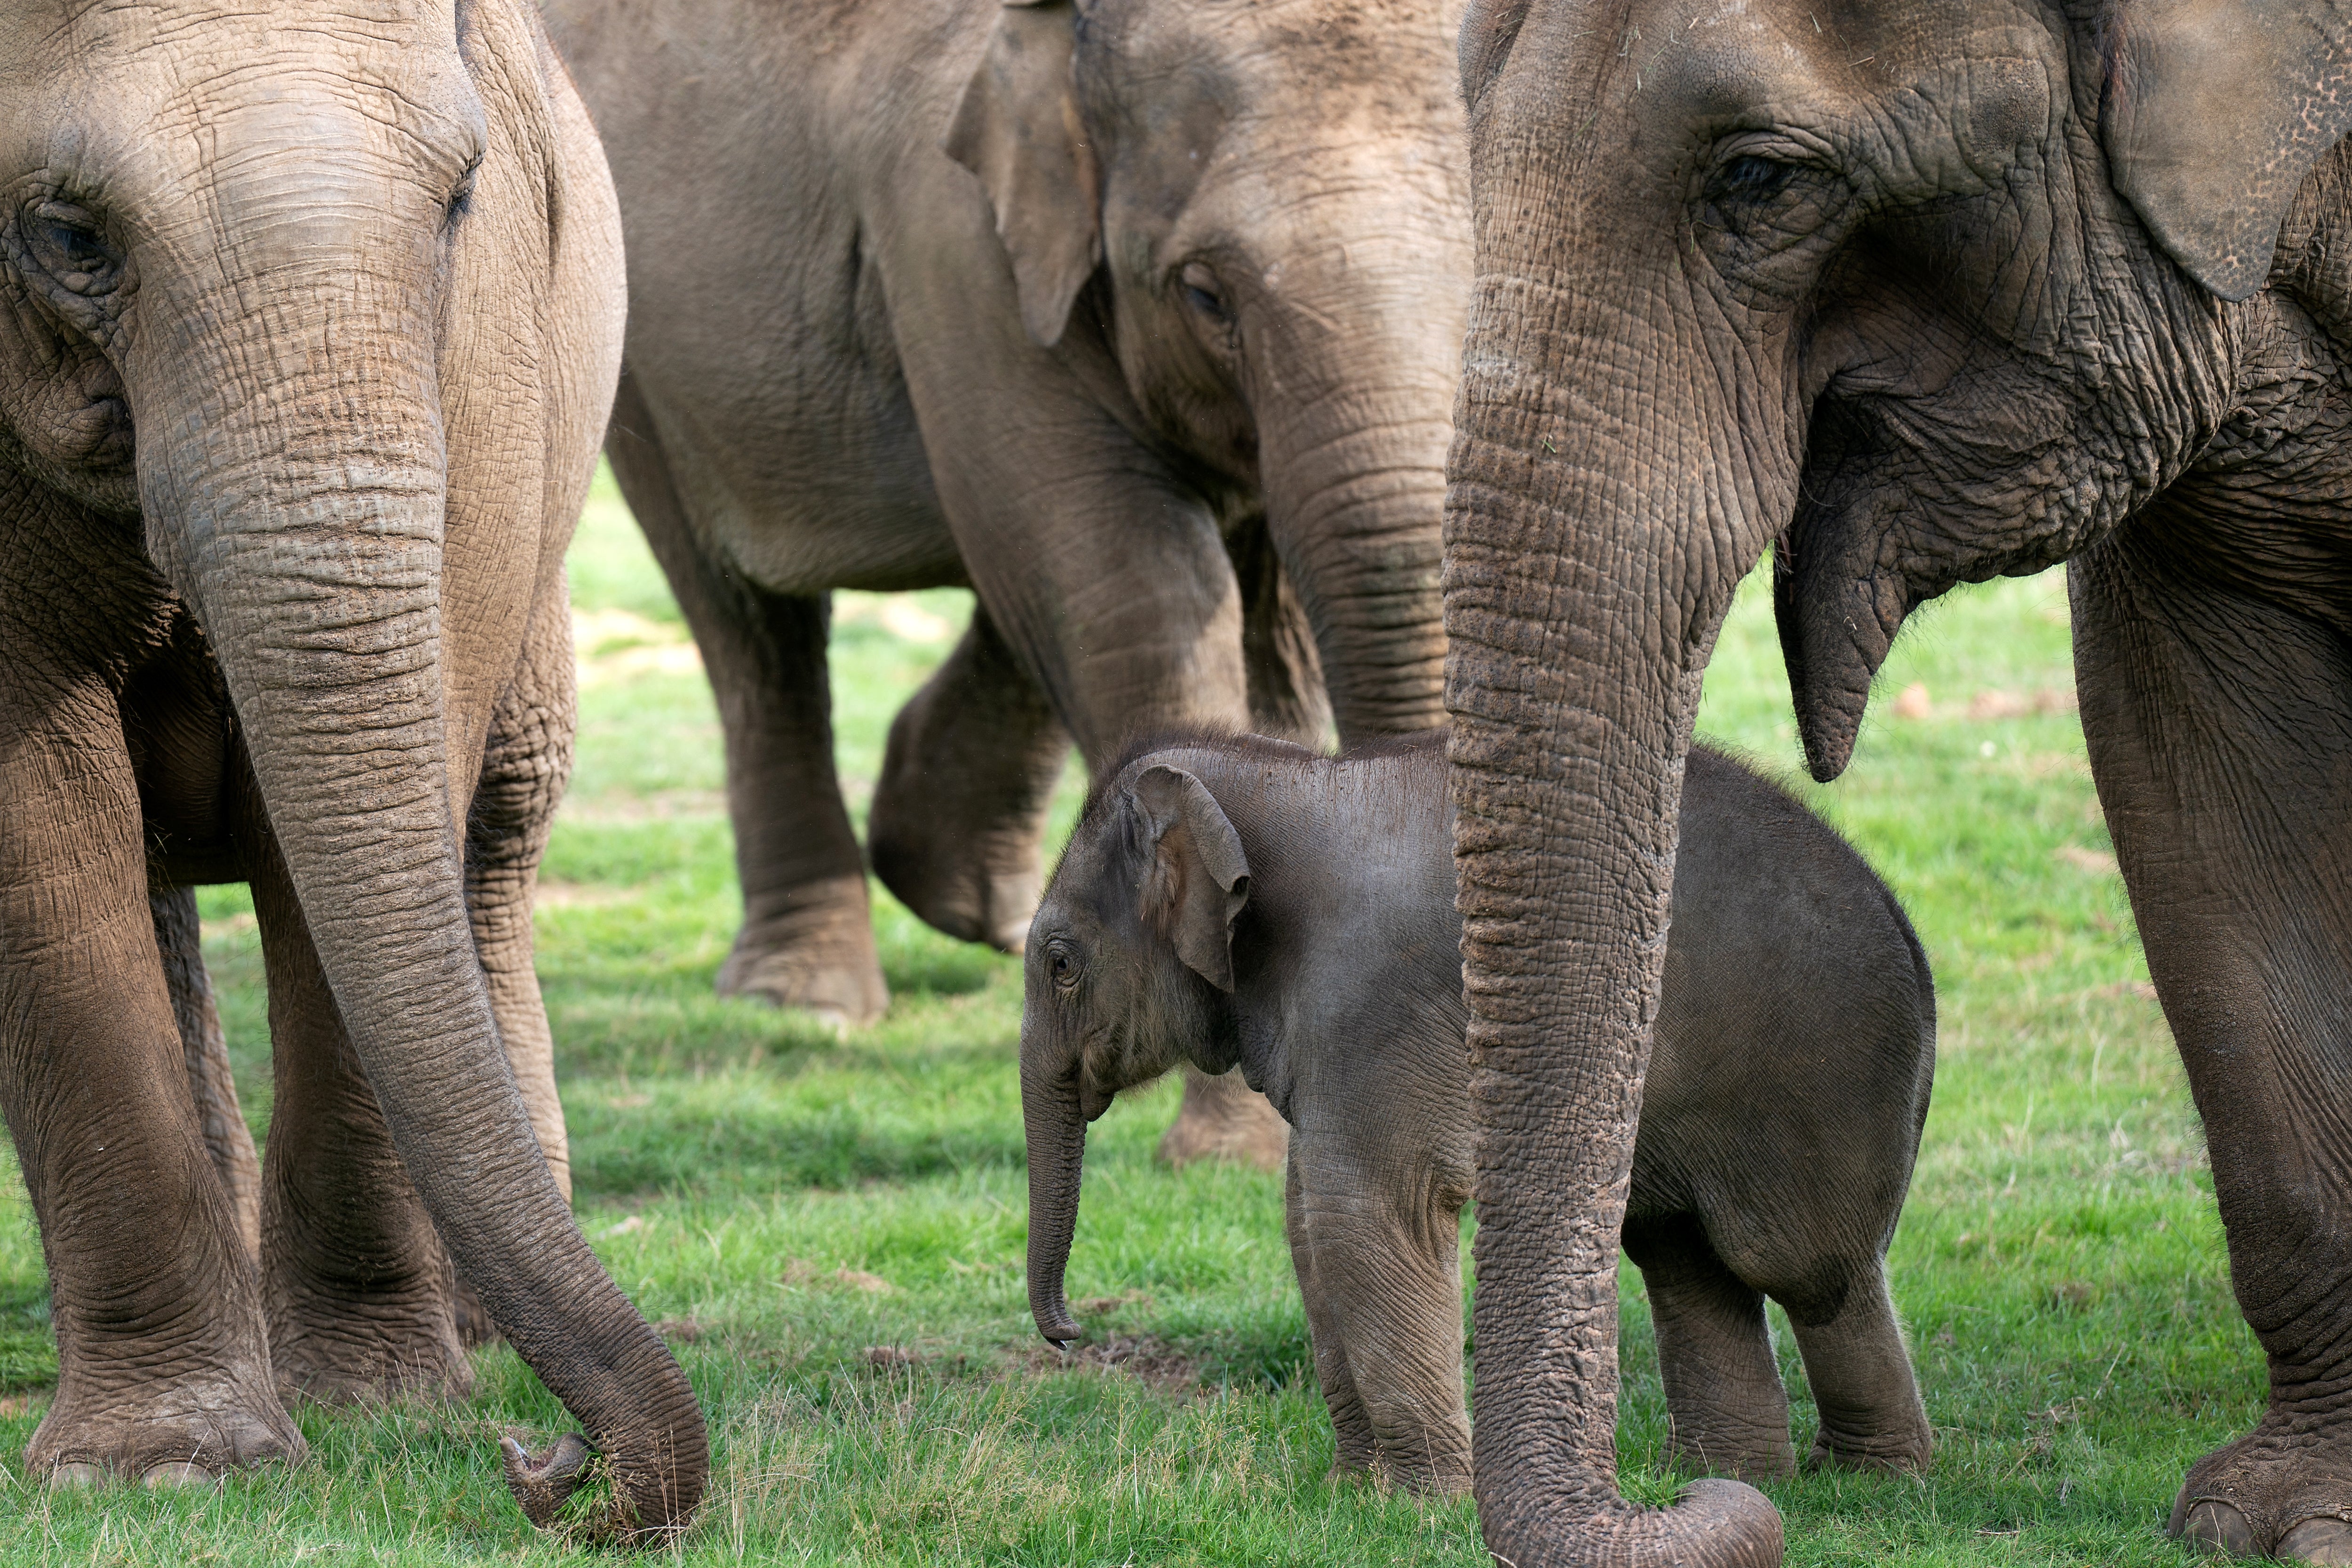 Baby Asian elephant Nang Phaya surrounded by the females of the herd in her enclosure at ZSL Whipsnade Zoo